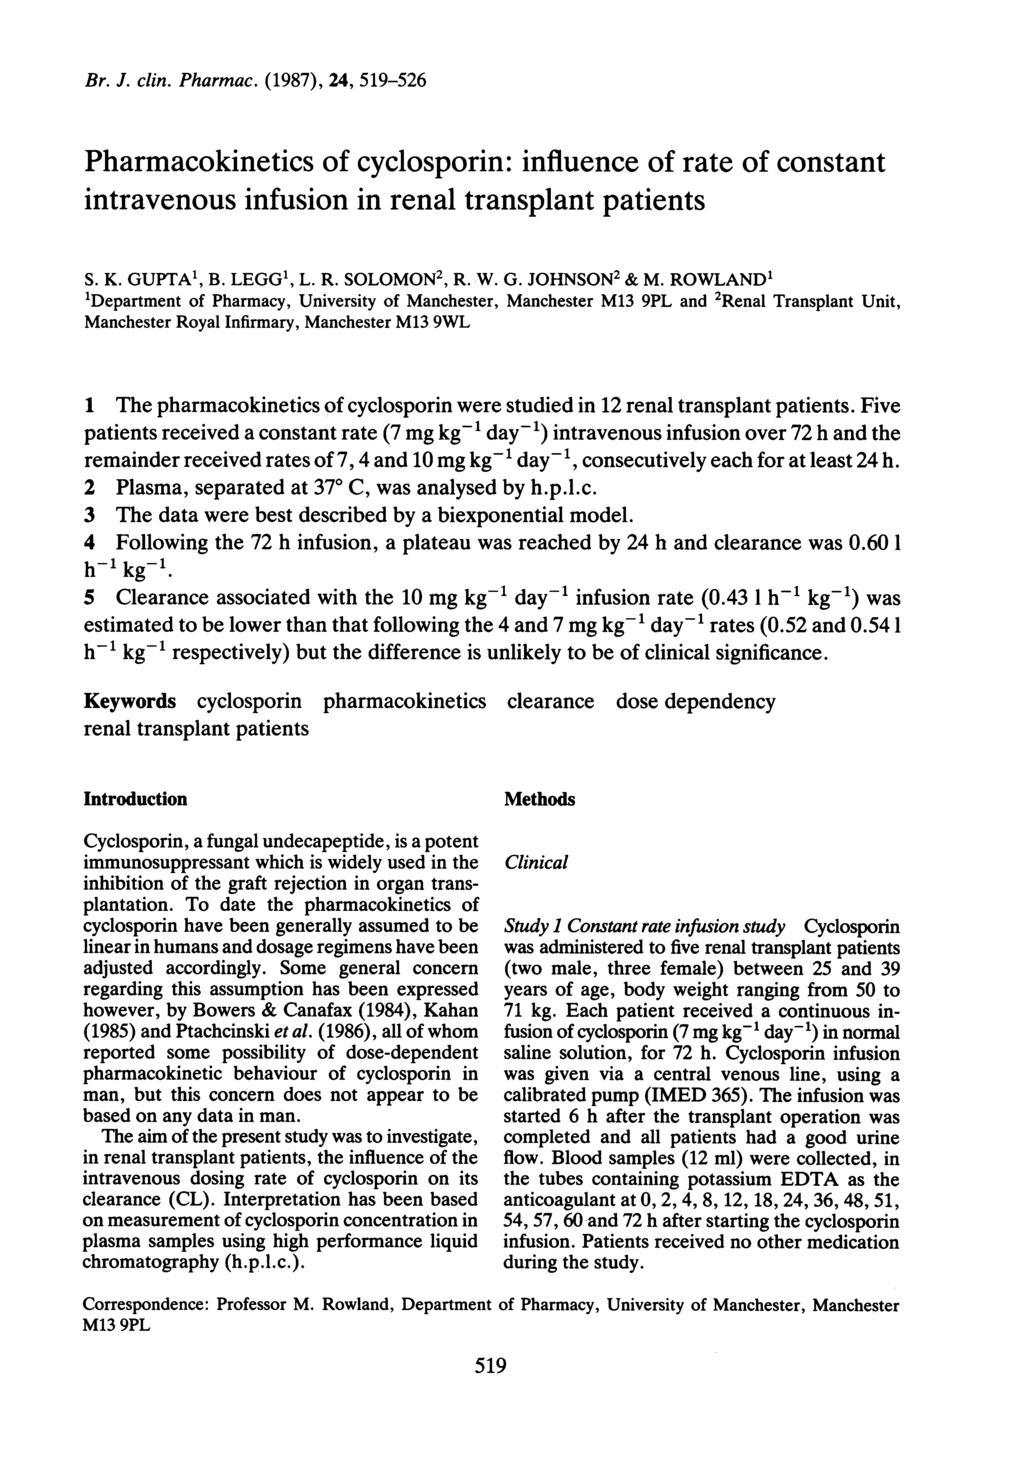 Br. J. clin. Pharmac. (1987), 24, 519-526 Pharmacokinetics of cyclosporin: influence of rate of constant intravenous infusion in renal transplant patients S. K. GUPTA1, B. LEGG1, L. R. SOLOMON2, R. W.